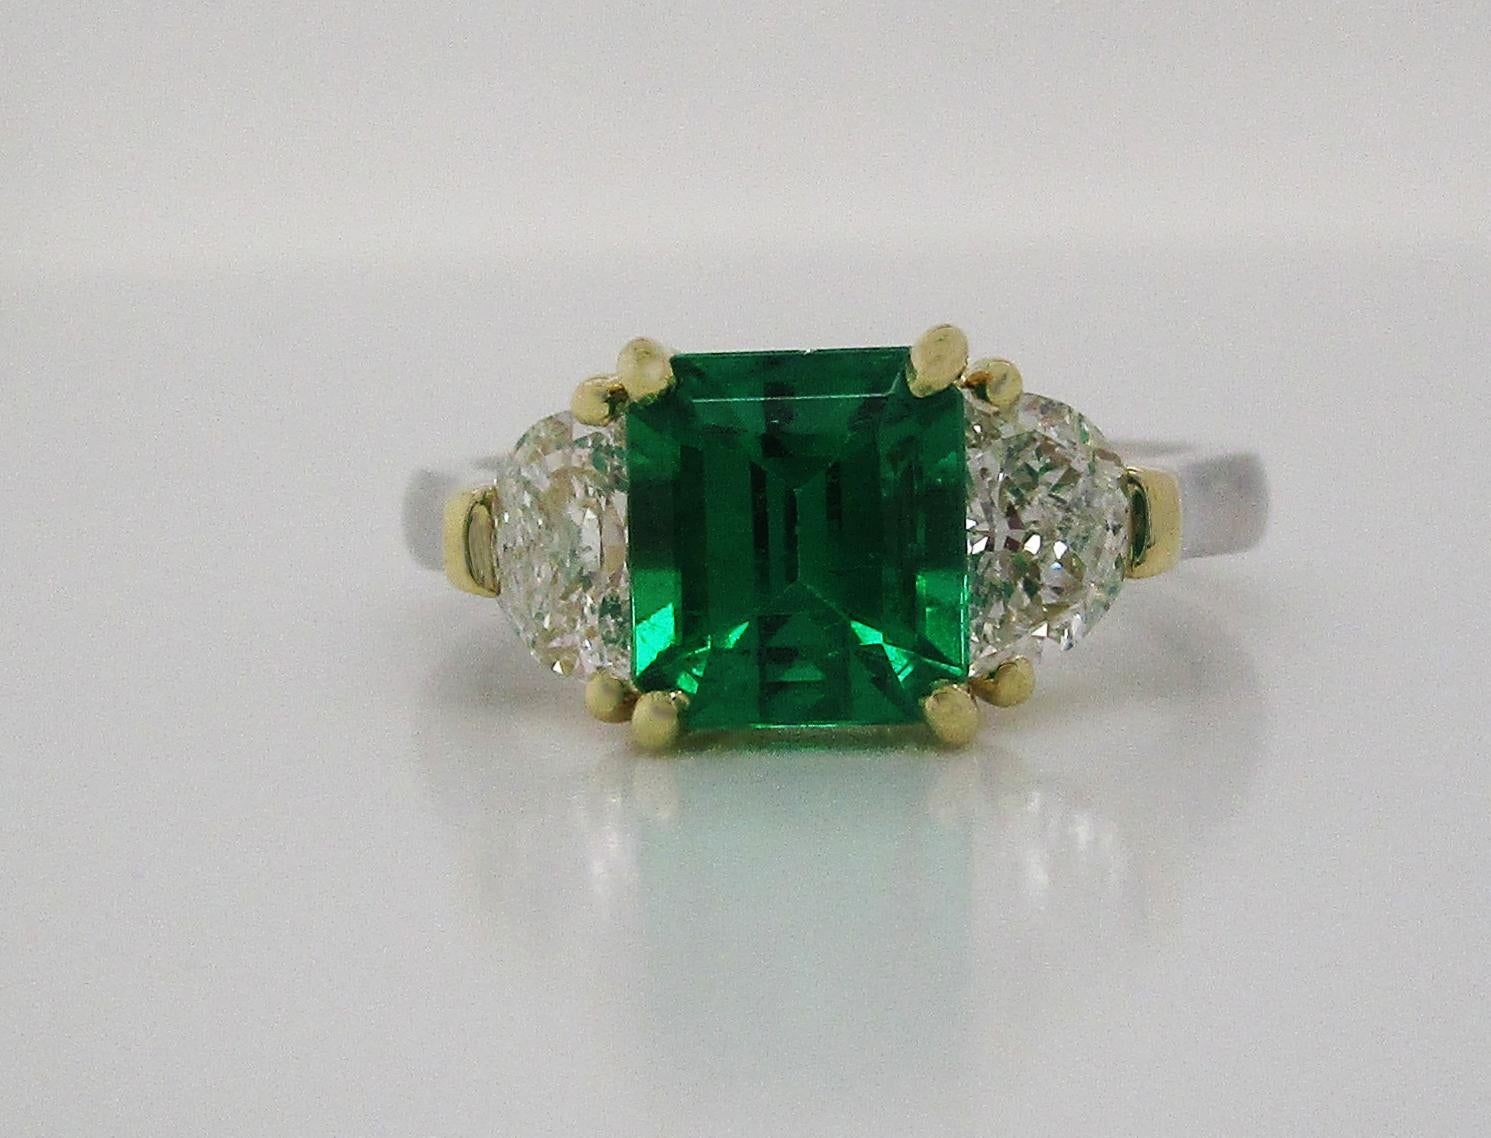 This breathtaking ring is in 18k yellow gold and platinum, boasting a killer deep green emerald center stone flanked by two perfectly matched brilliant white half-moon diamonds. The emerald center is a stunning deep green color and an elegant square